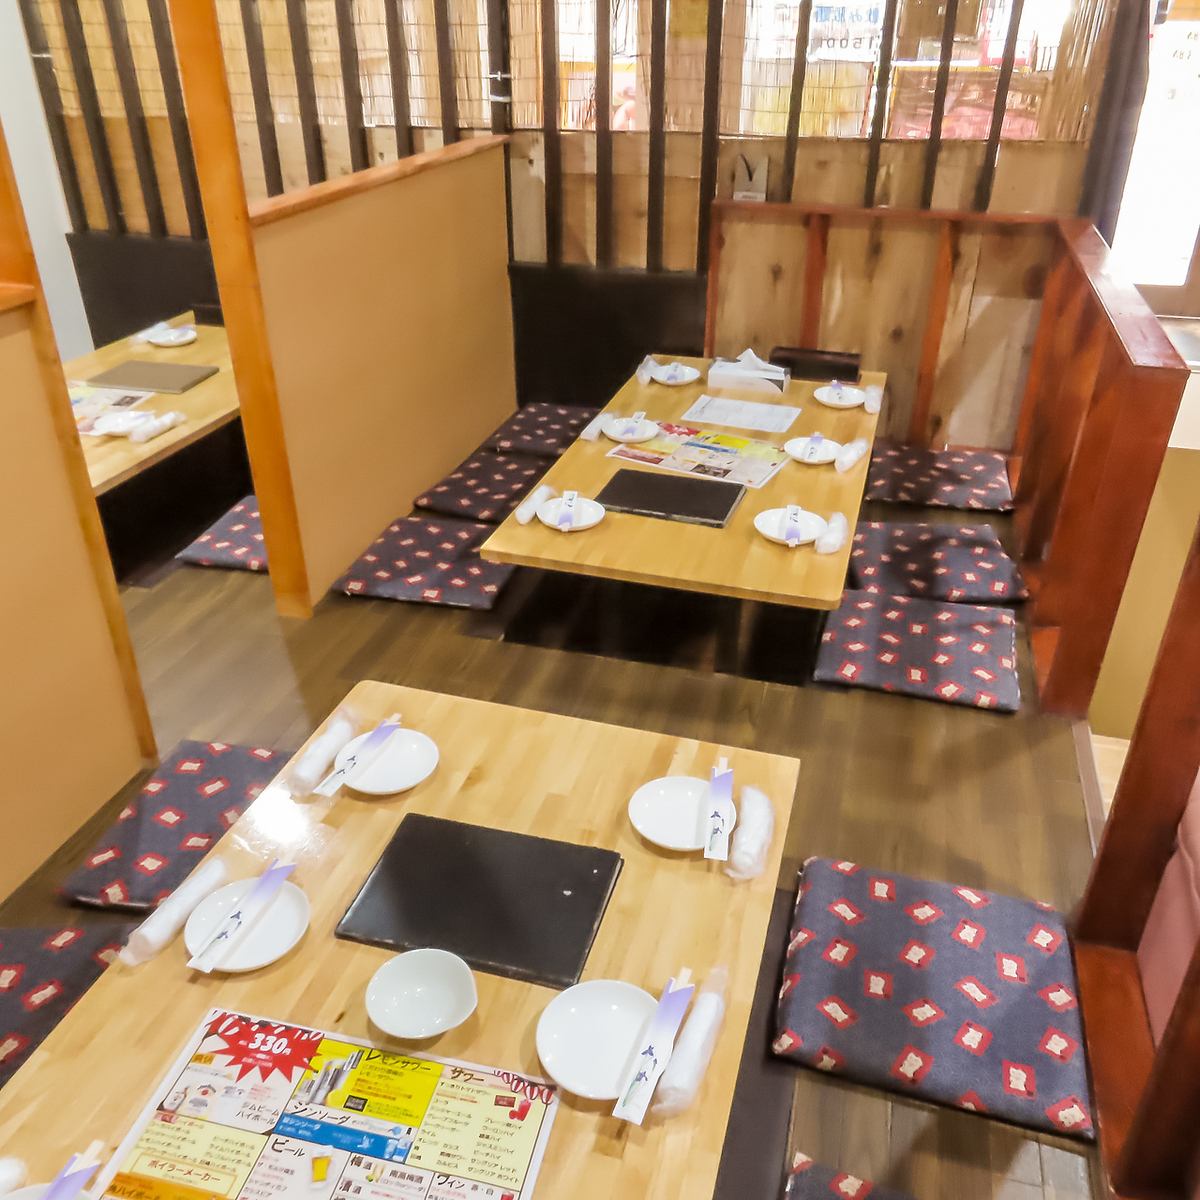 We also have a tatami room with a sunken kotatsu! It can also be used by a large number of people.